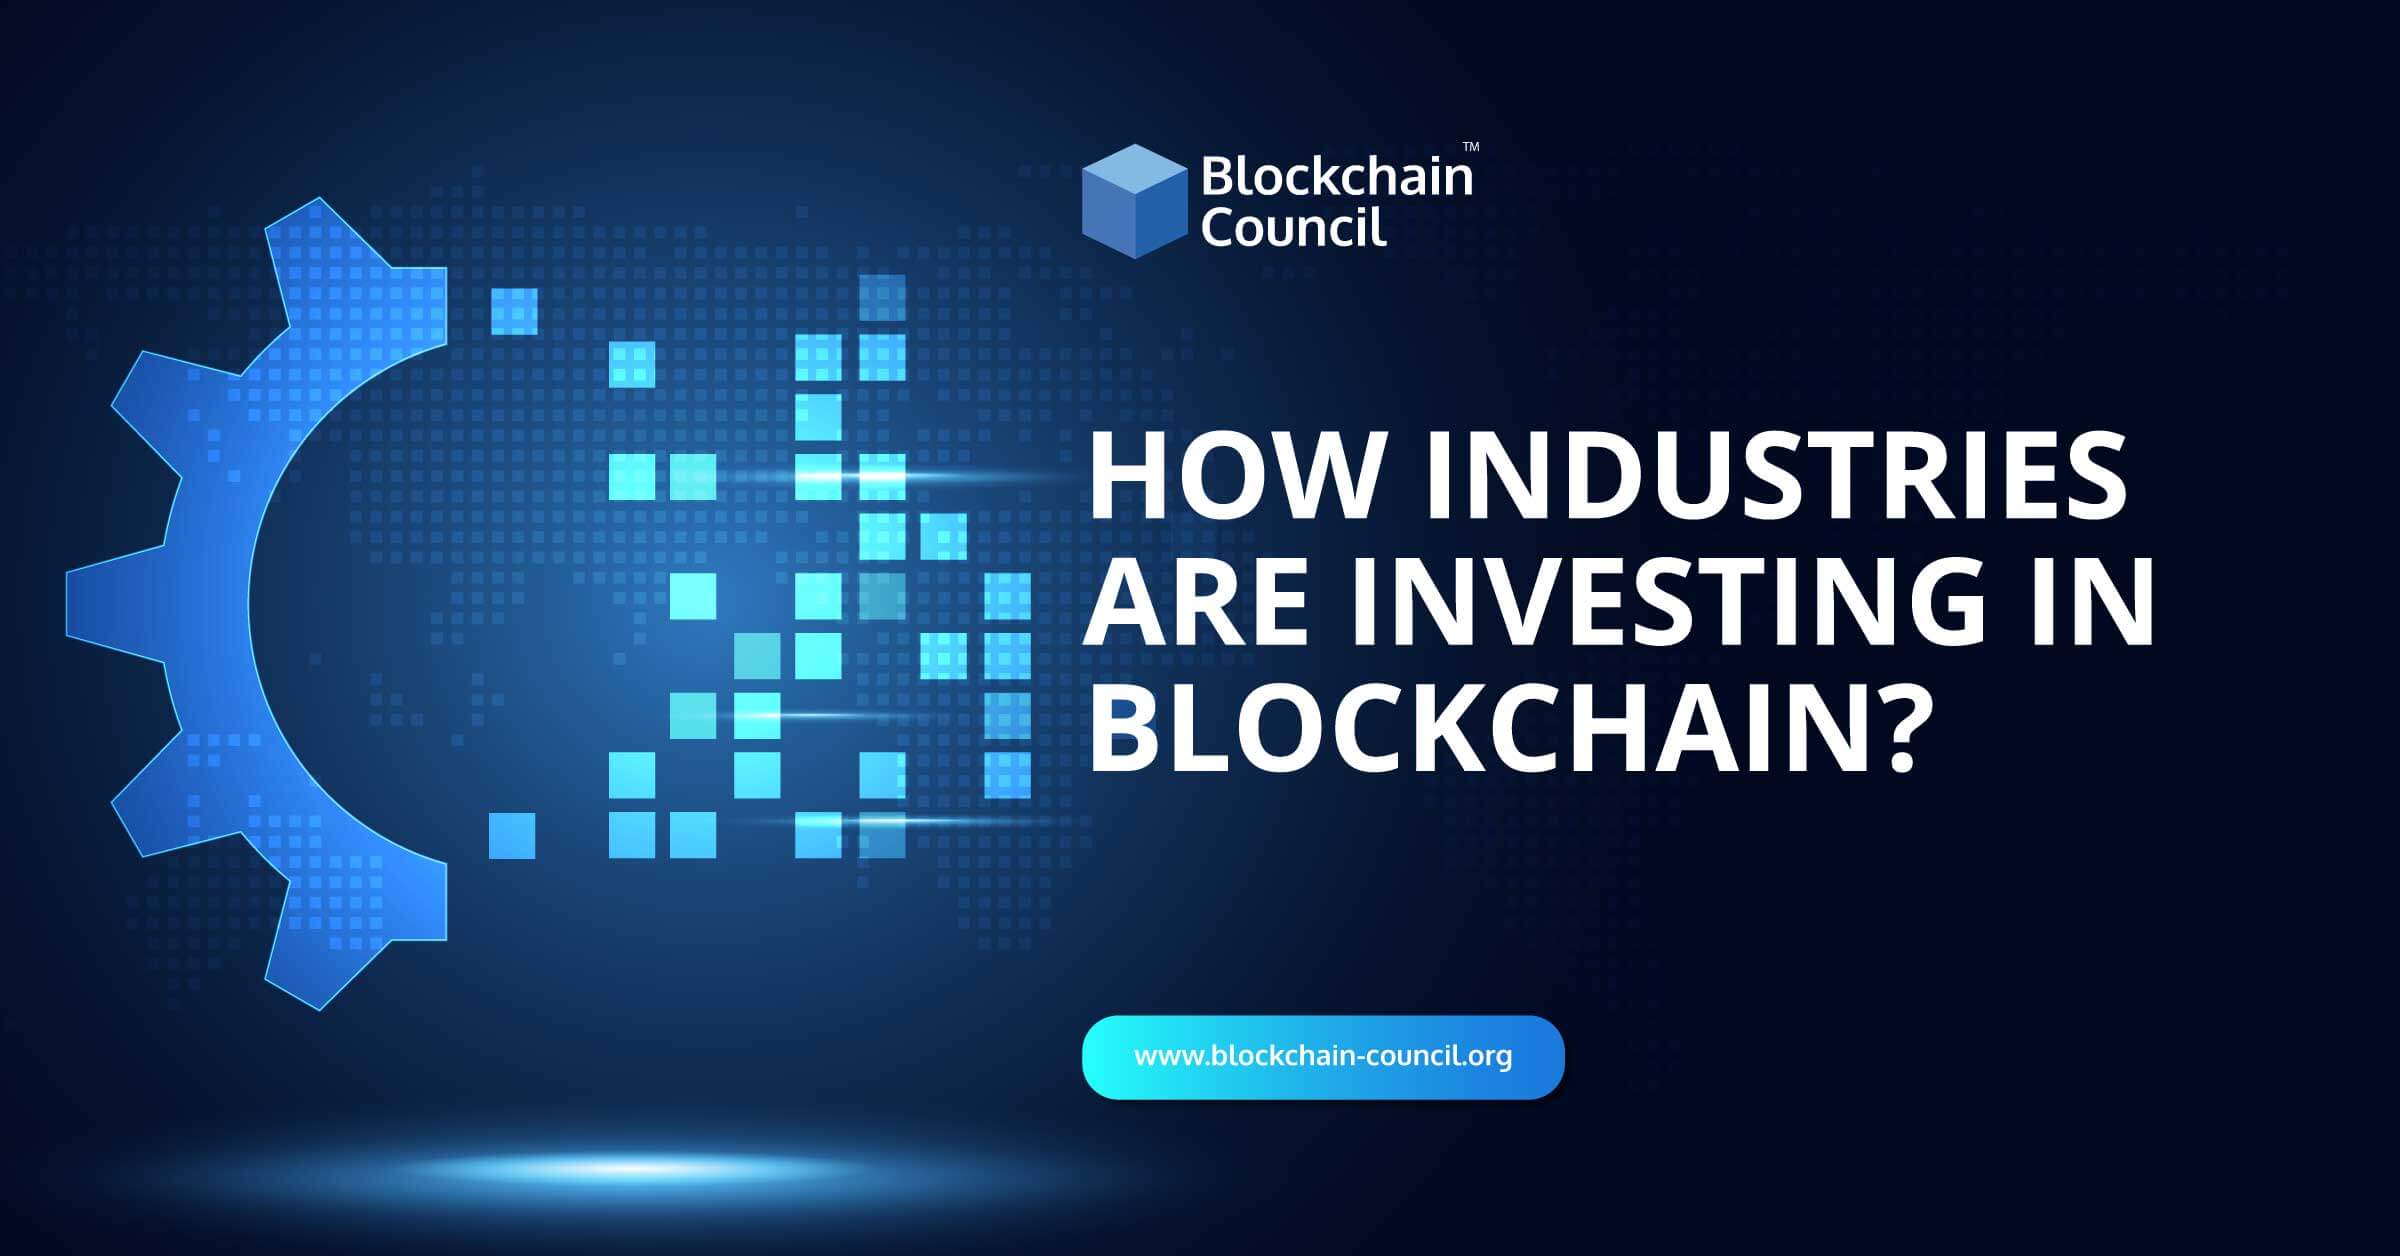 How Industries are Investing in Blockchain?